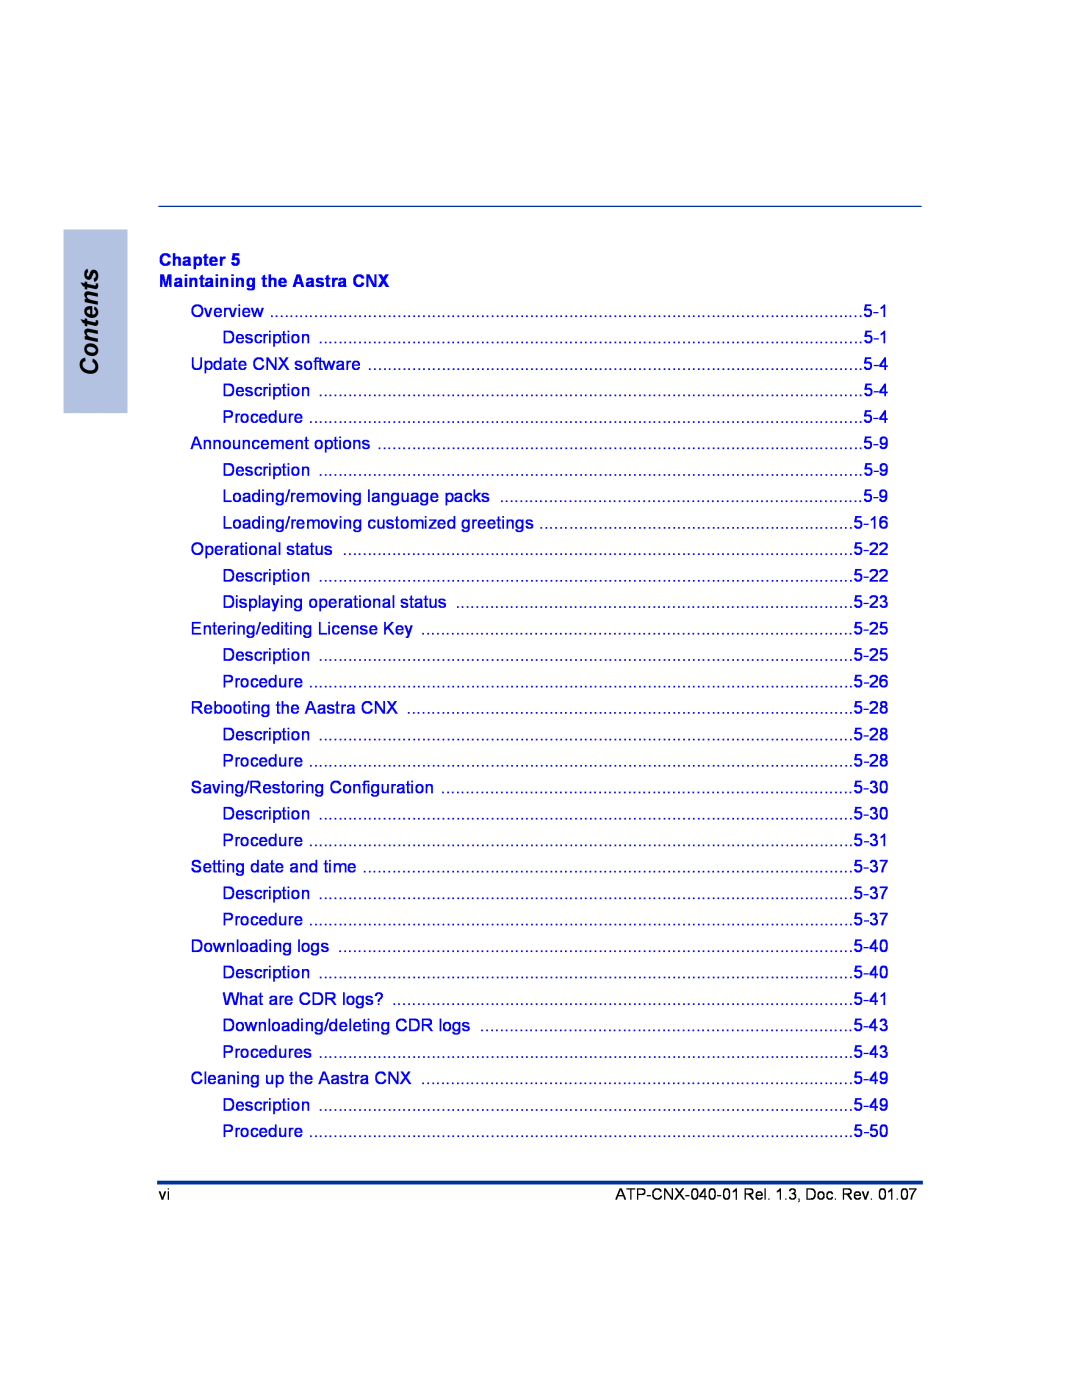 Aastra Telecom ATP-CNX-040-01 manual Contents, Chapter Maintaining the Aastra CNX 